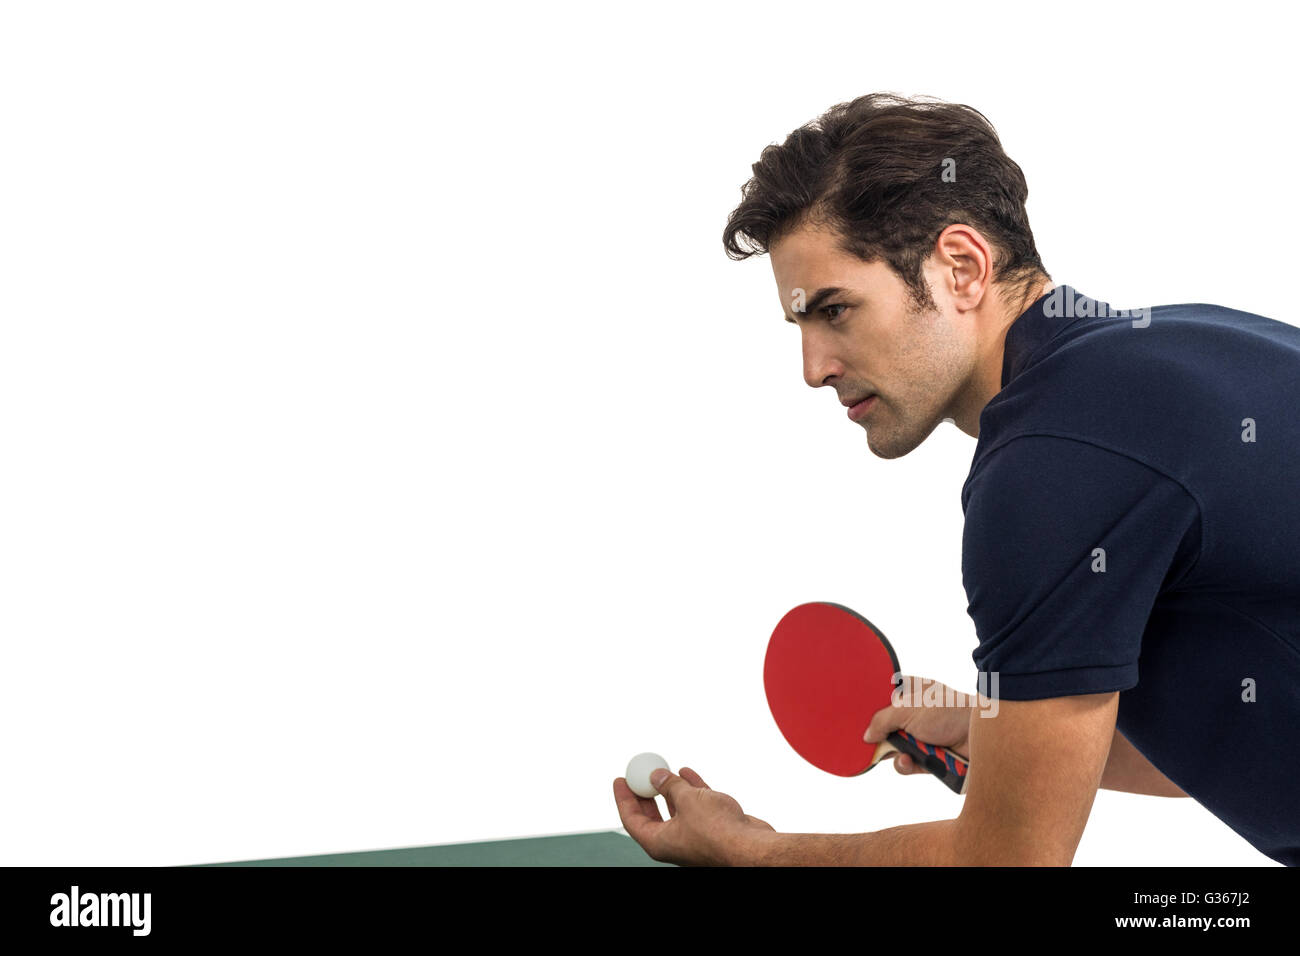 Confident male athlete playing table tennis Stock Photo